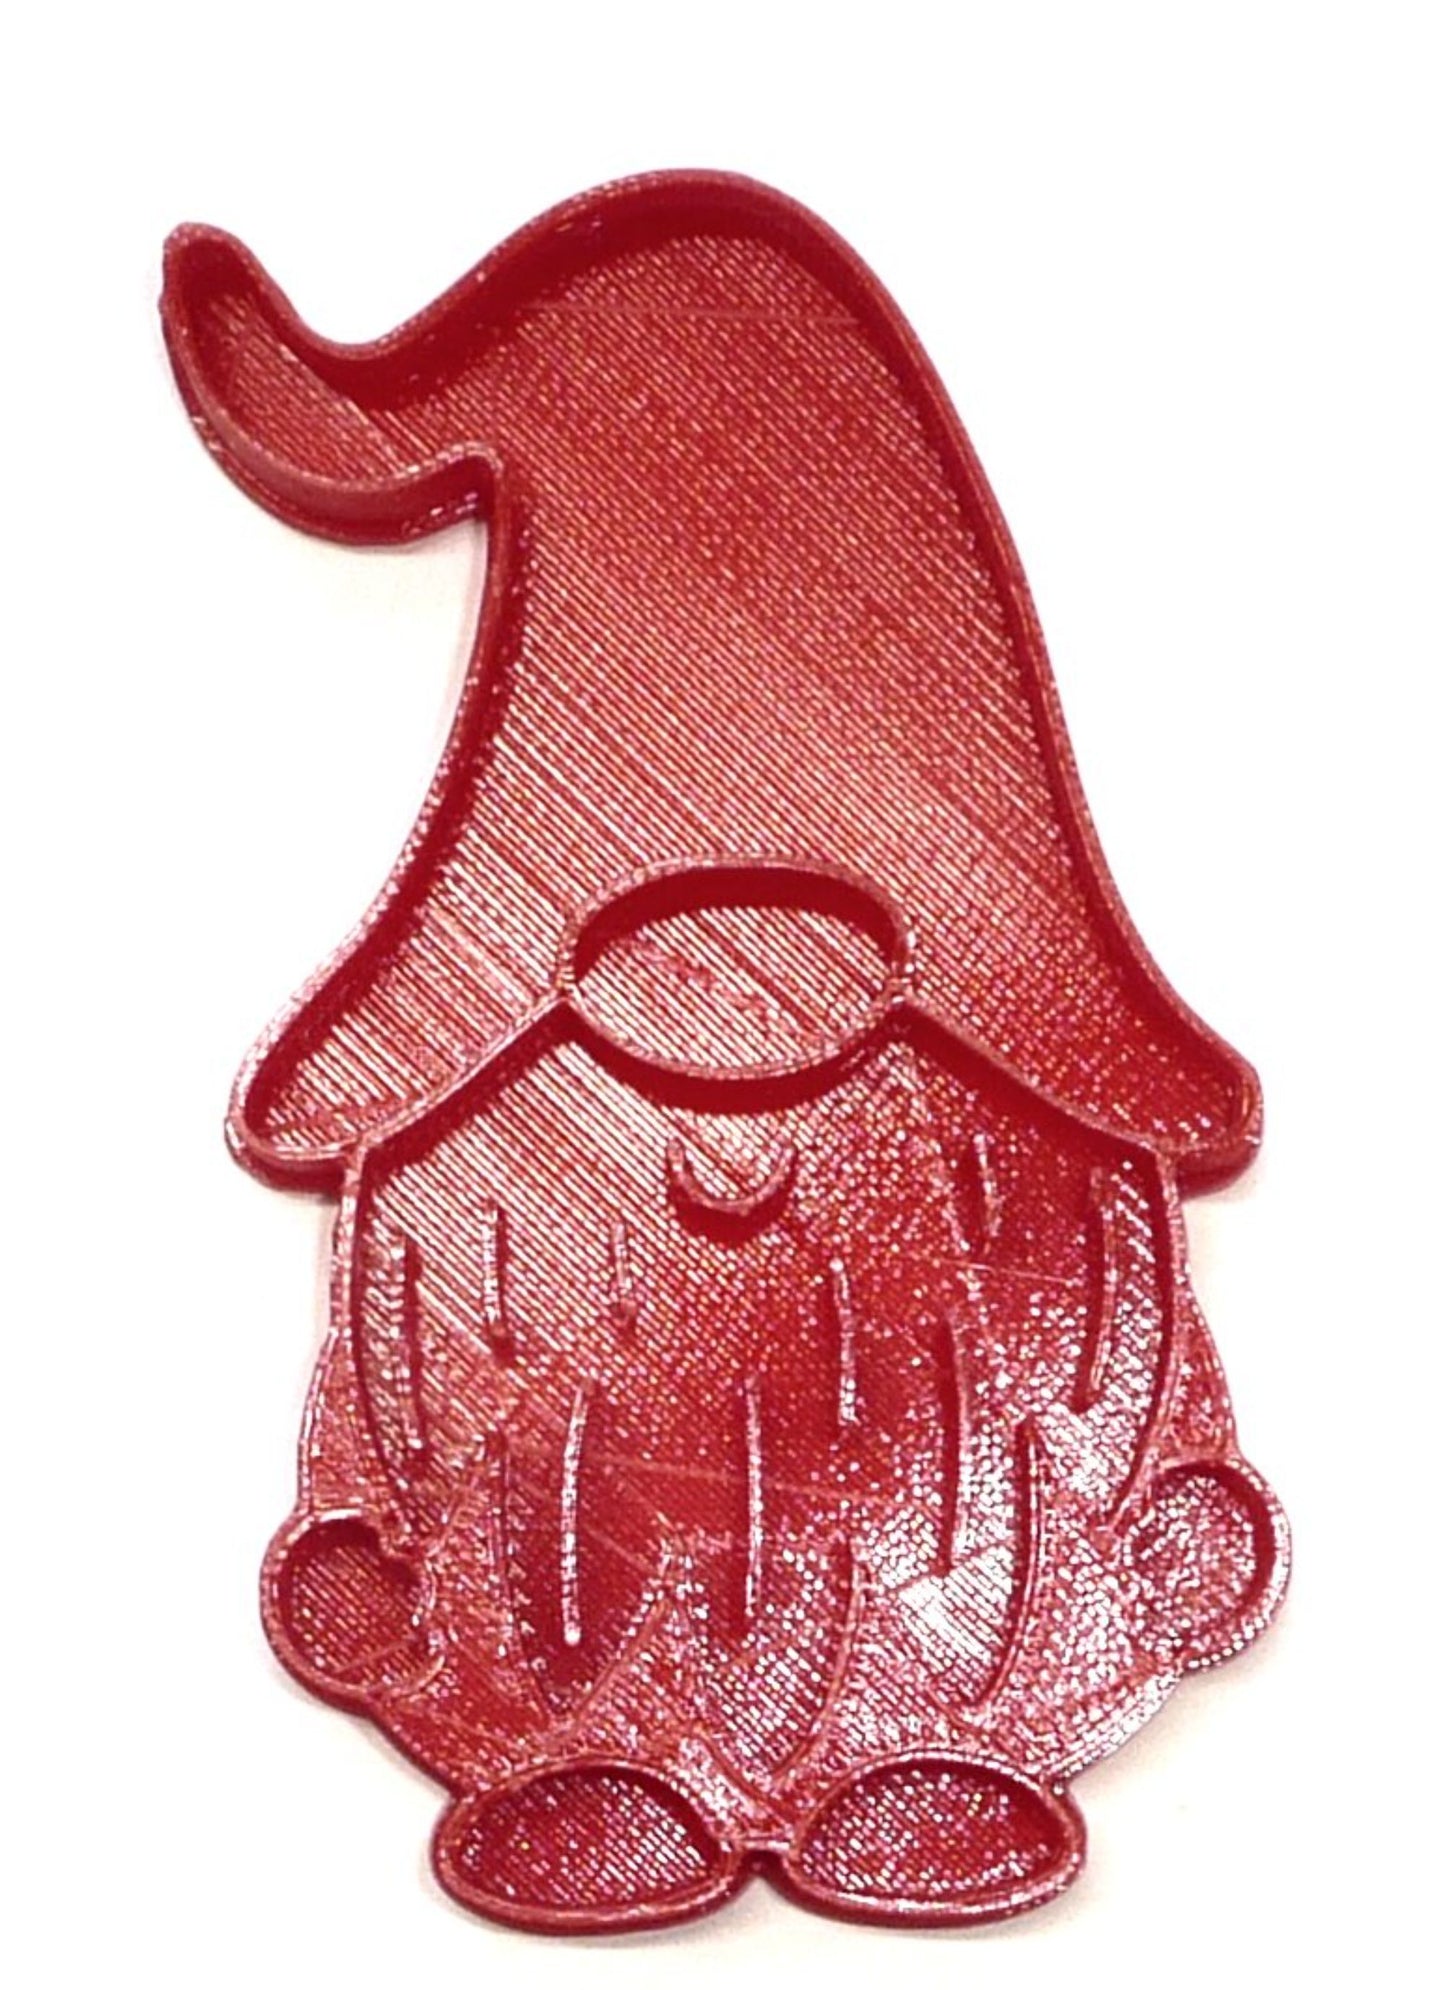 Gnome 3 Dwarf Goblin Mythical Creature Cookie Stamp Embosser USA PR4507